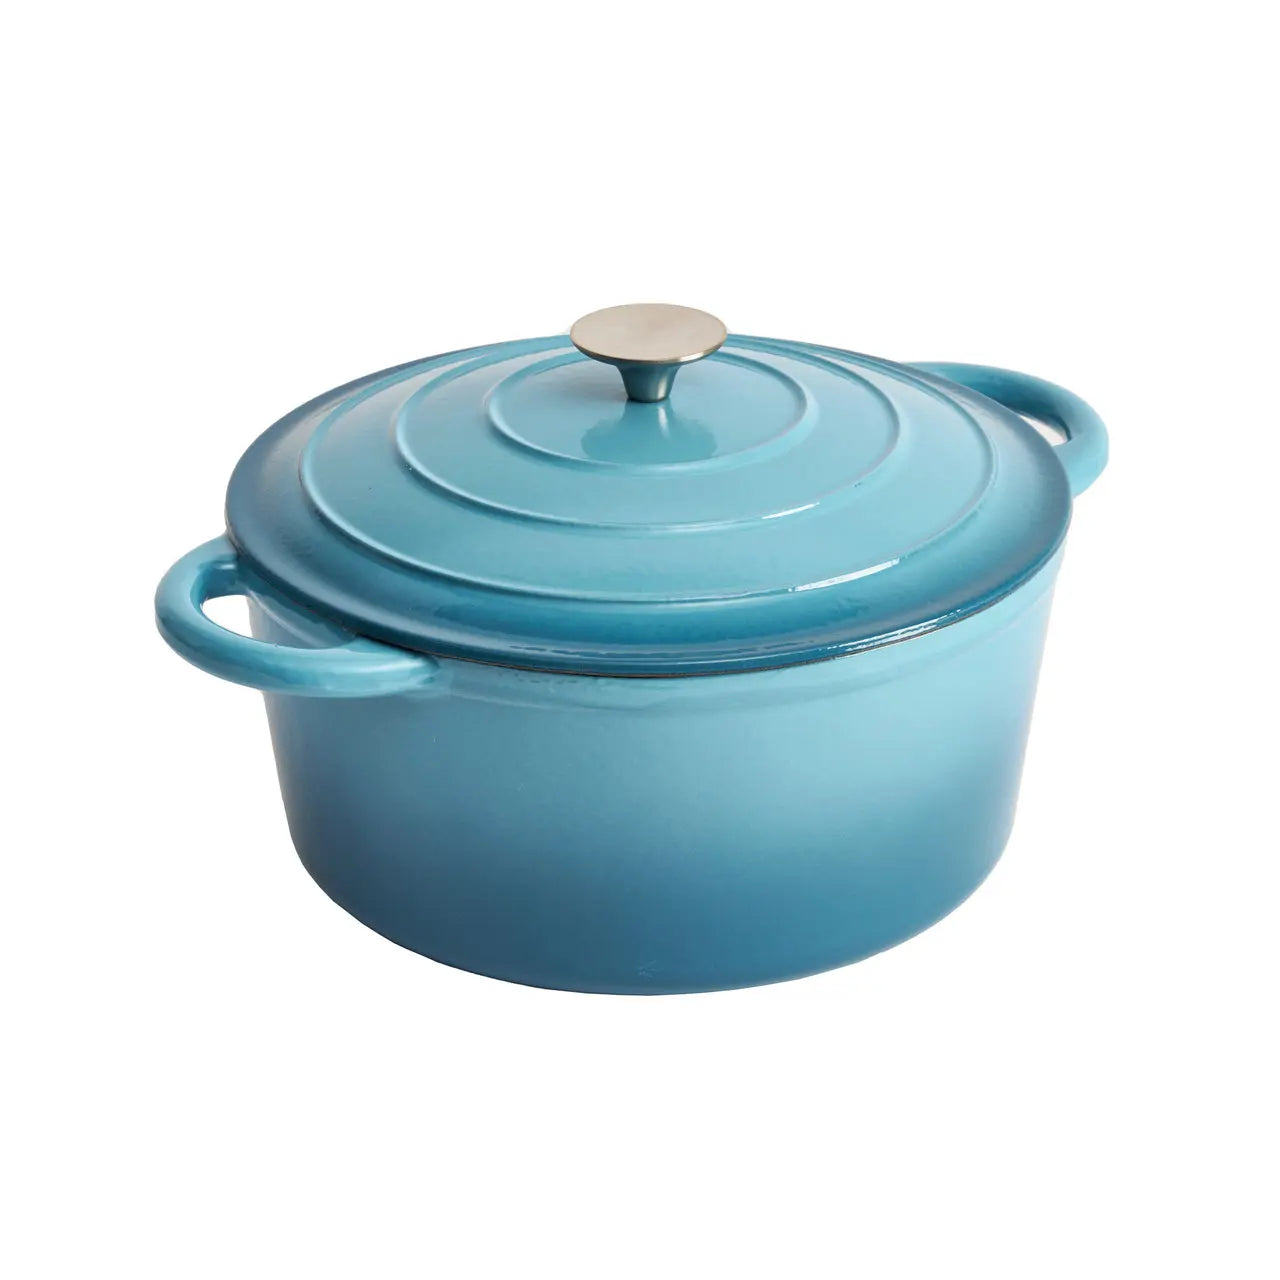 Enameled Cast Iron 9.5 inch Round Dutch Oven in Agave